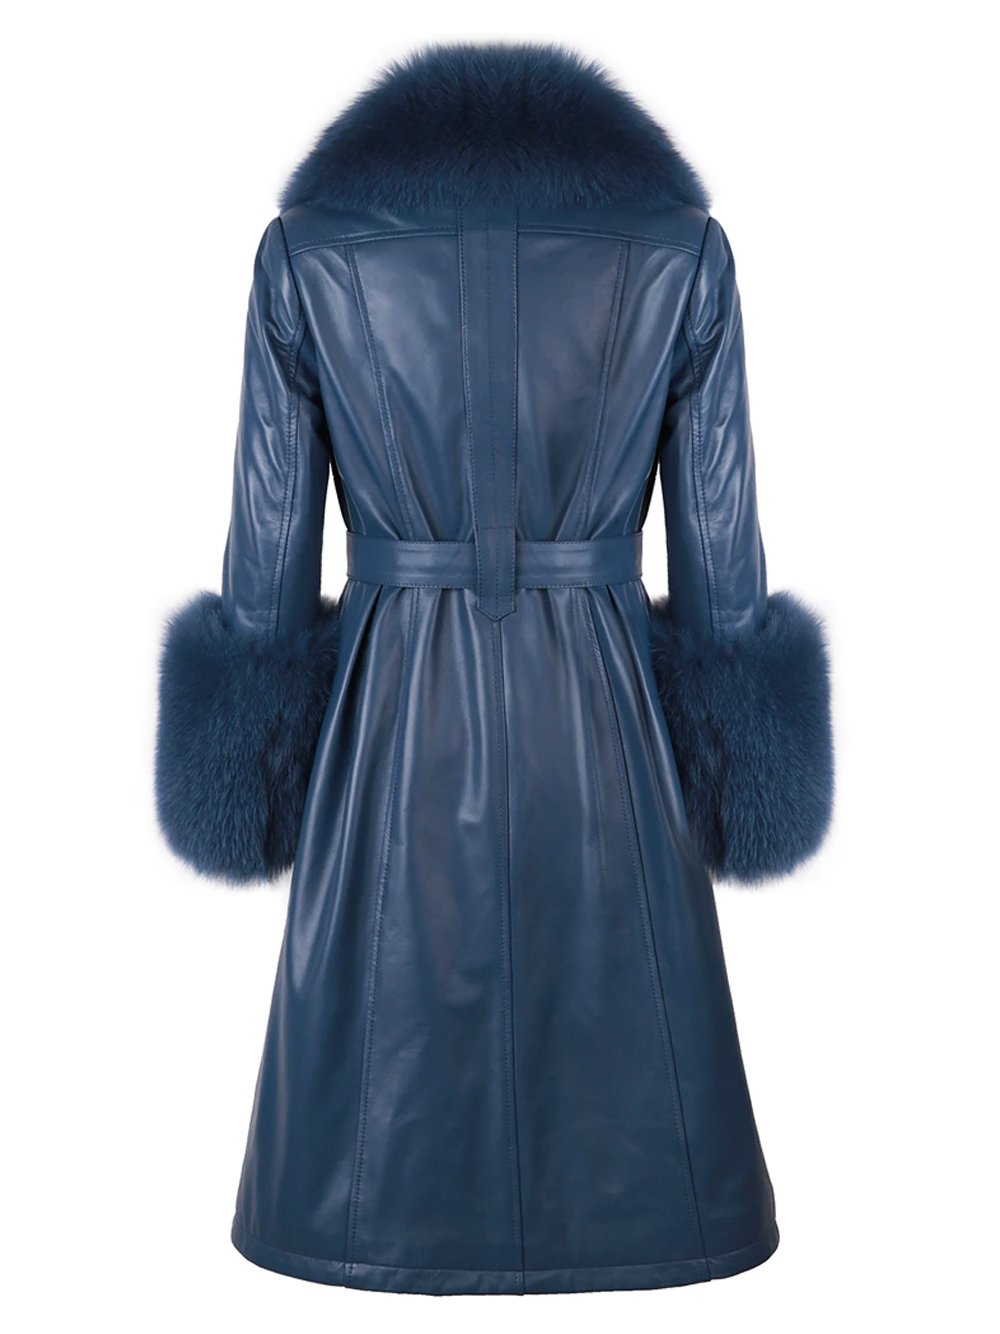 Faux Fur Genuine Leather Coat in Navy